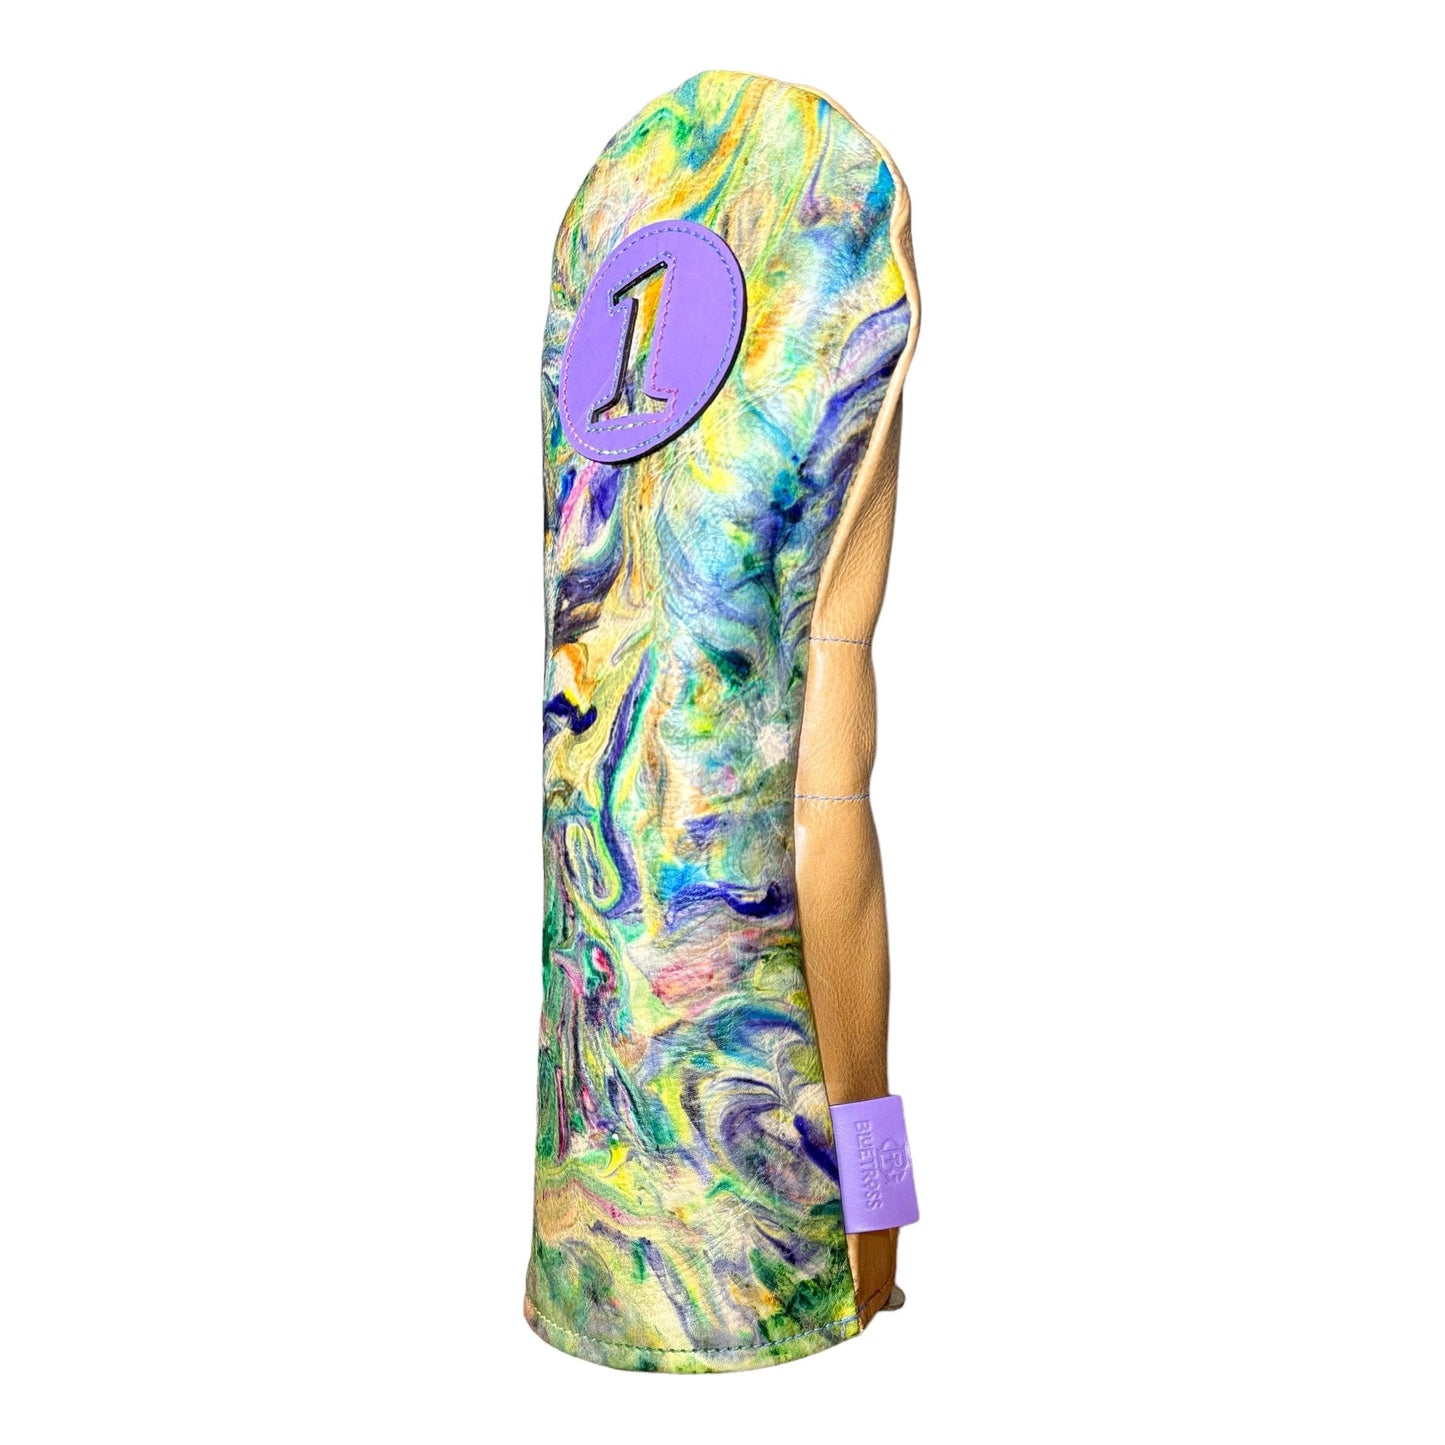 ustom Tie-dyed leather headcover with blues and purples with purple leather circle cut out with number one side view showing natural color back